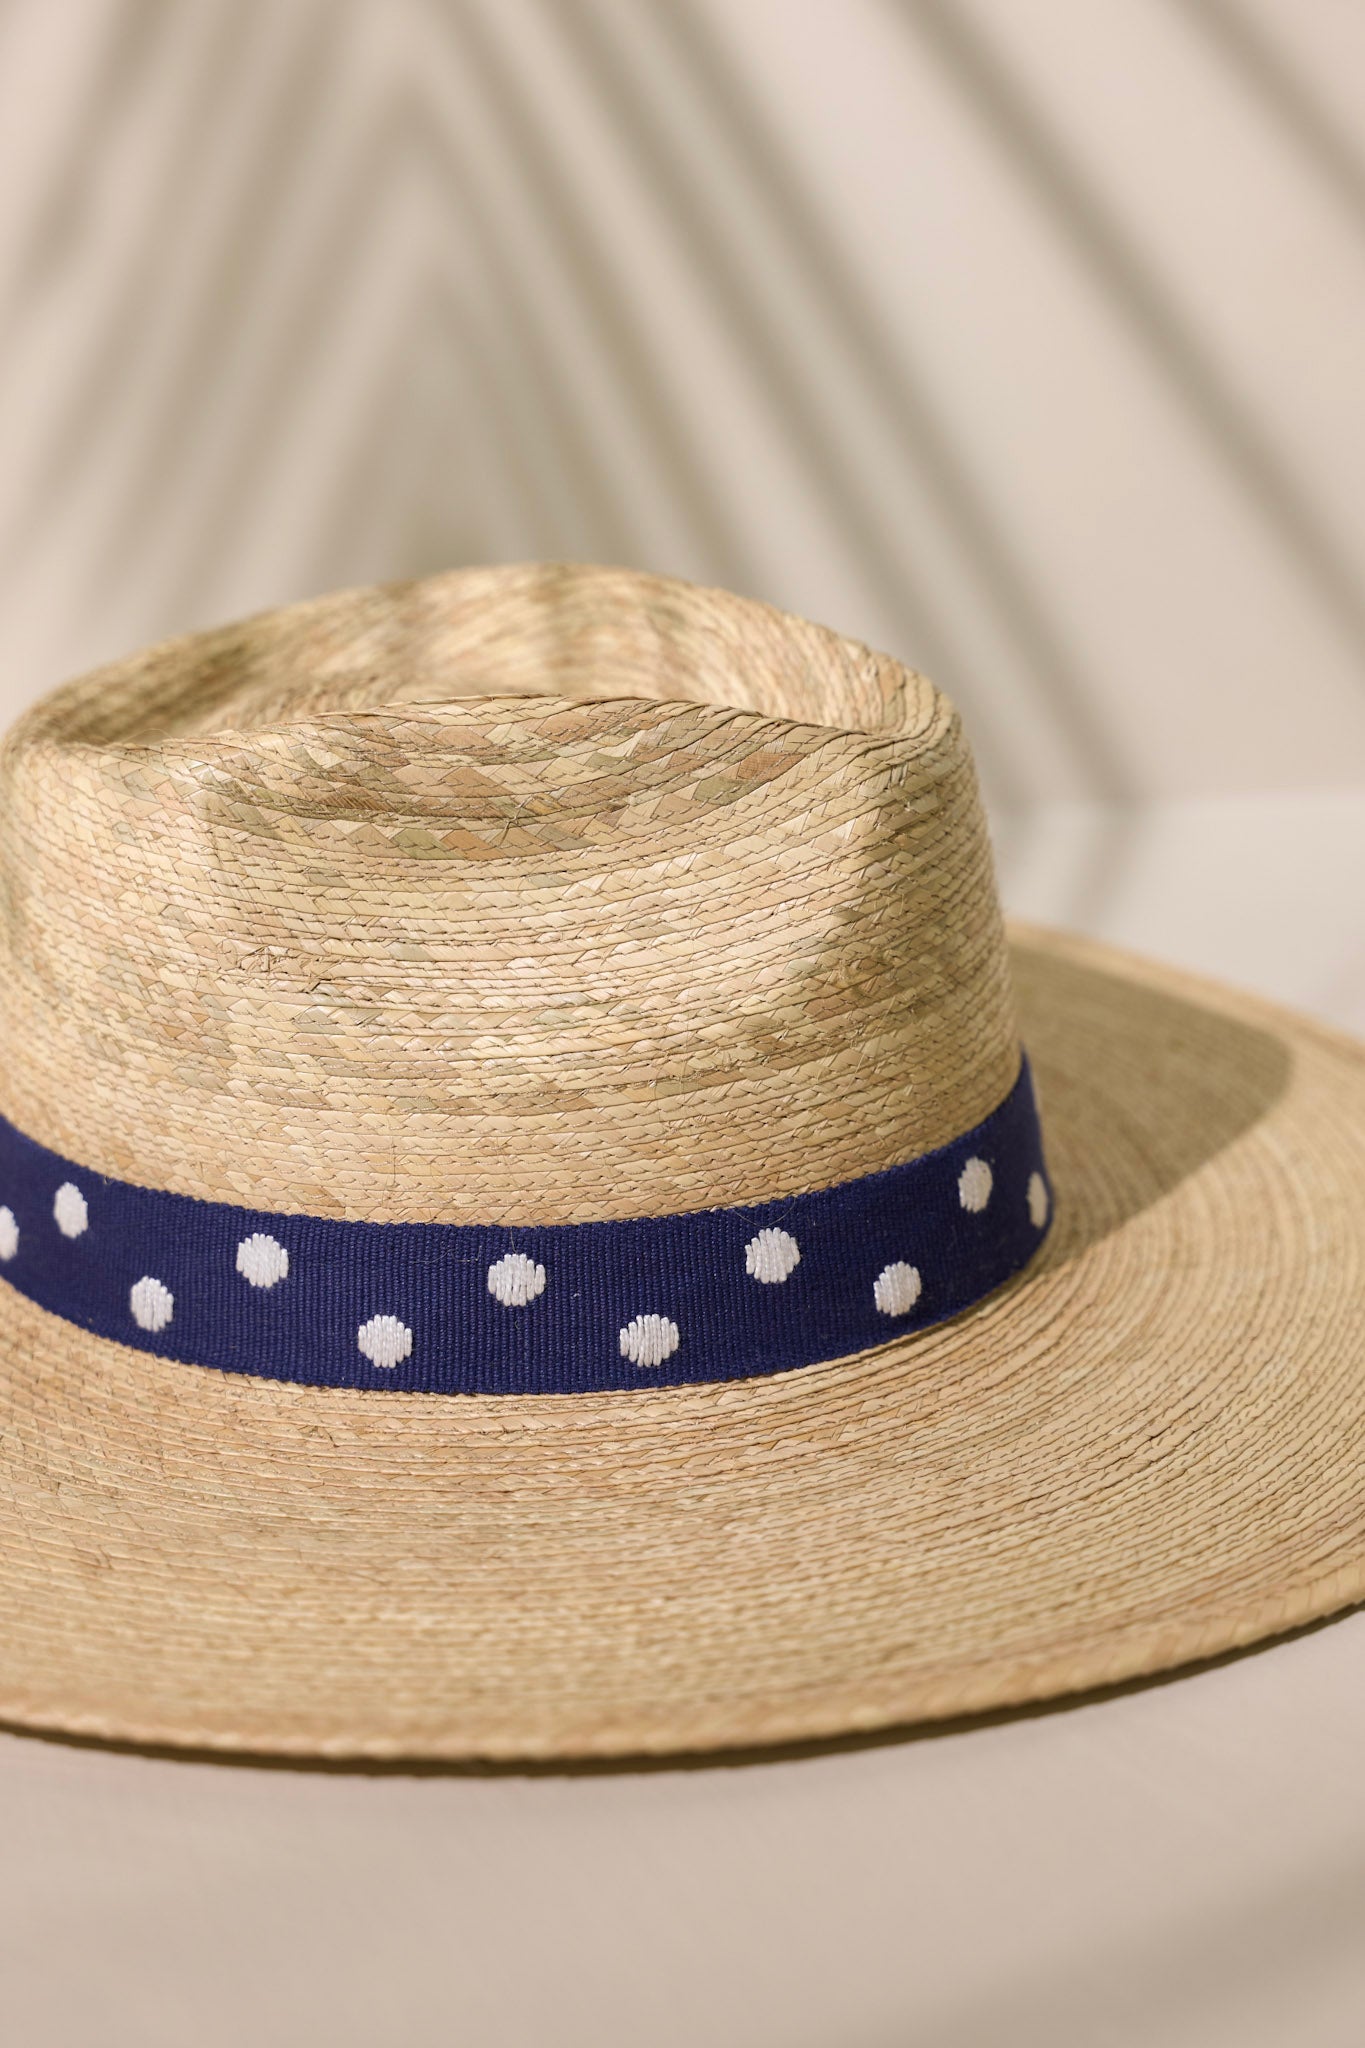 Detailed shot of this Wendy hat features a navy, cotton woven band with white polka dots.